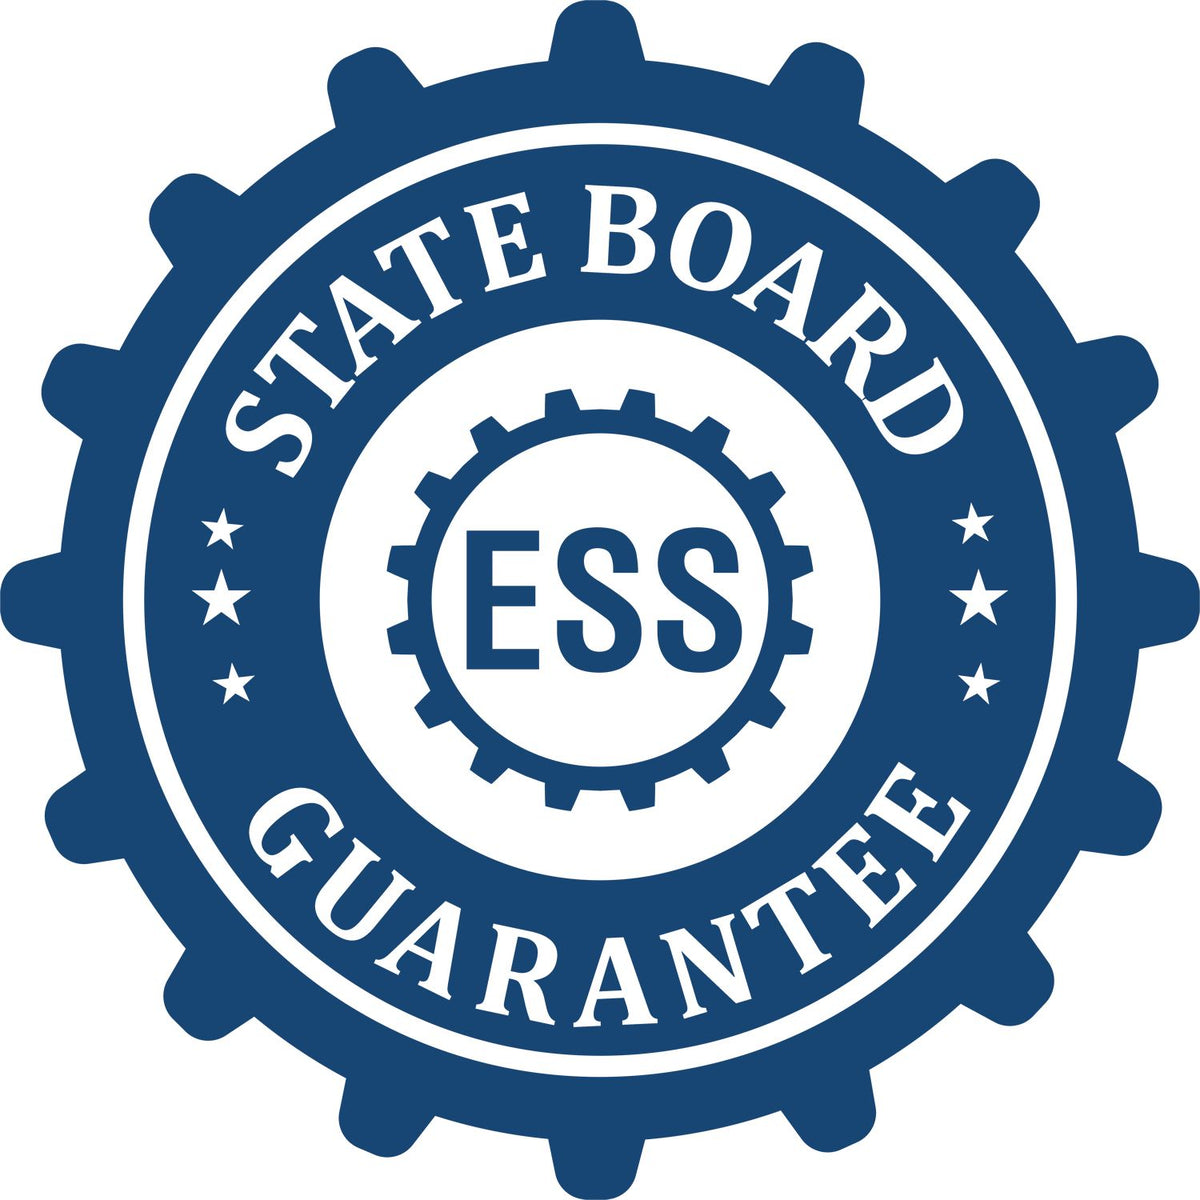 An emblem in a gear shape illustrating a state board guarantee for the Hybrid Florida Engineer Seal